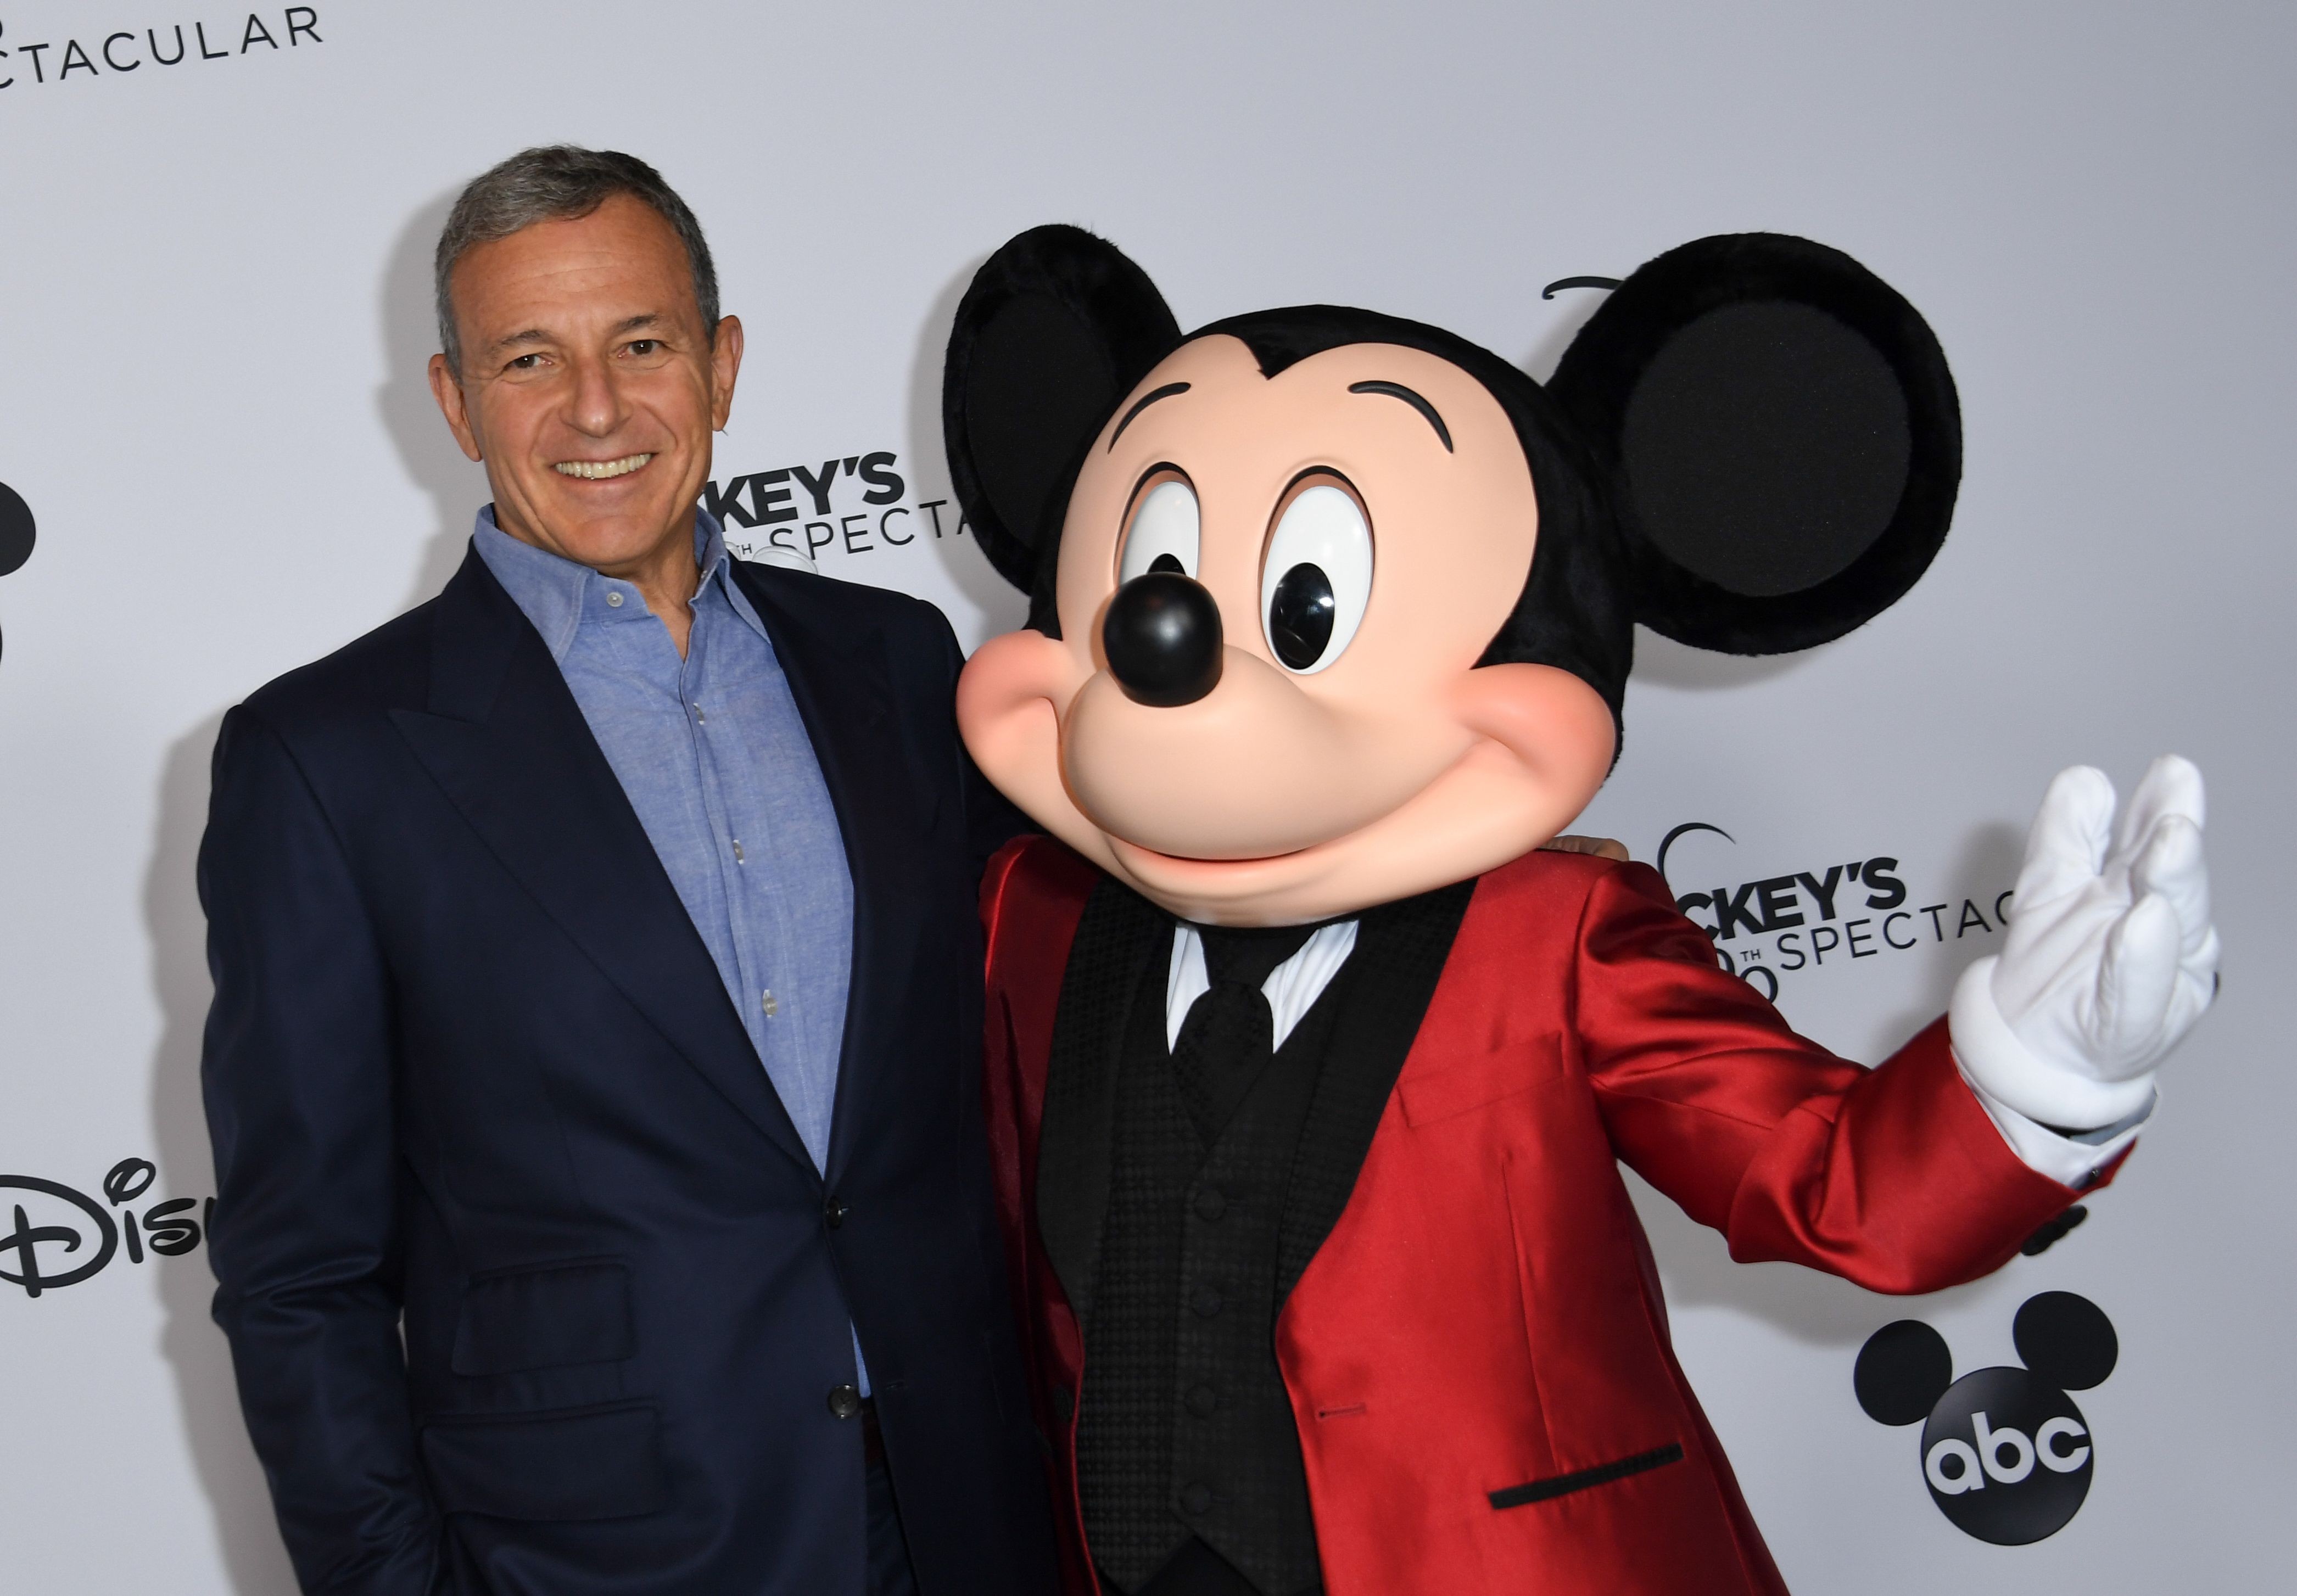 Disney’s Bob Iger and Mickey Mouse at Mickey’s 90th Spectacular at The Shrine Auditorium in Los Angeles in October 2018. Photo: AFP